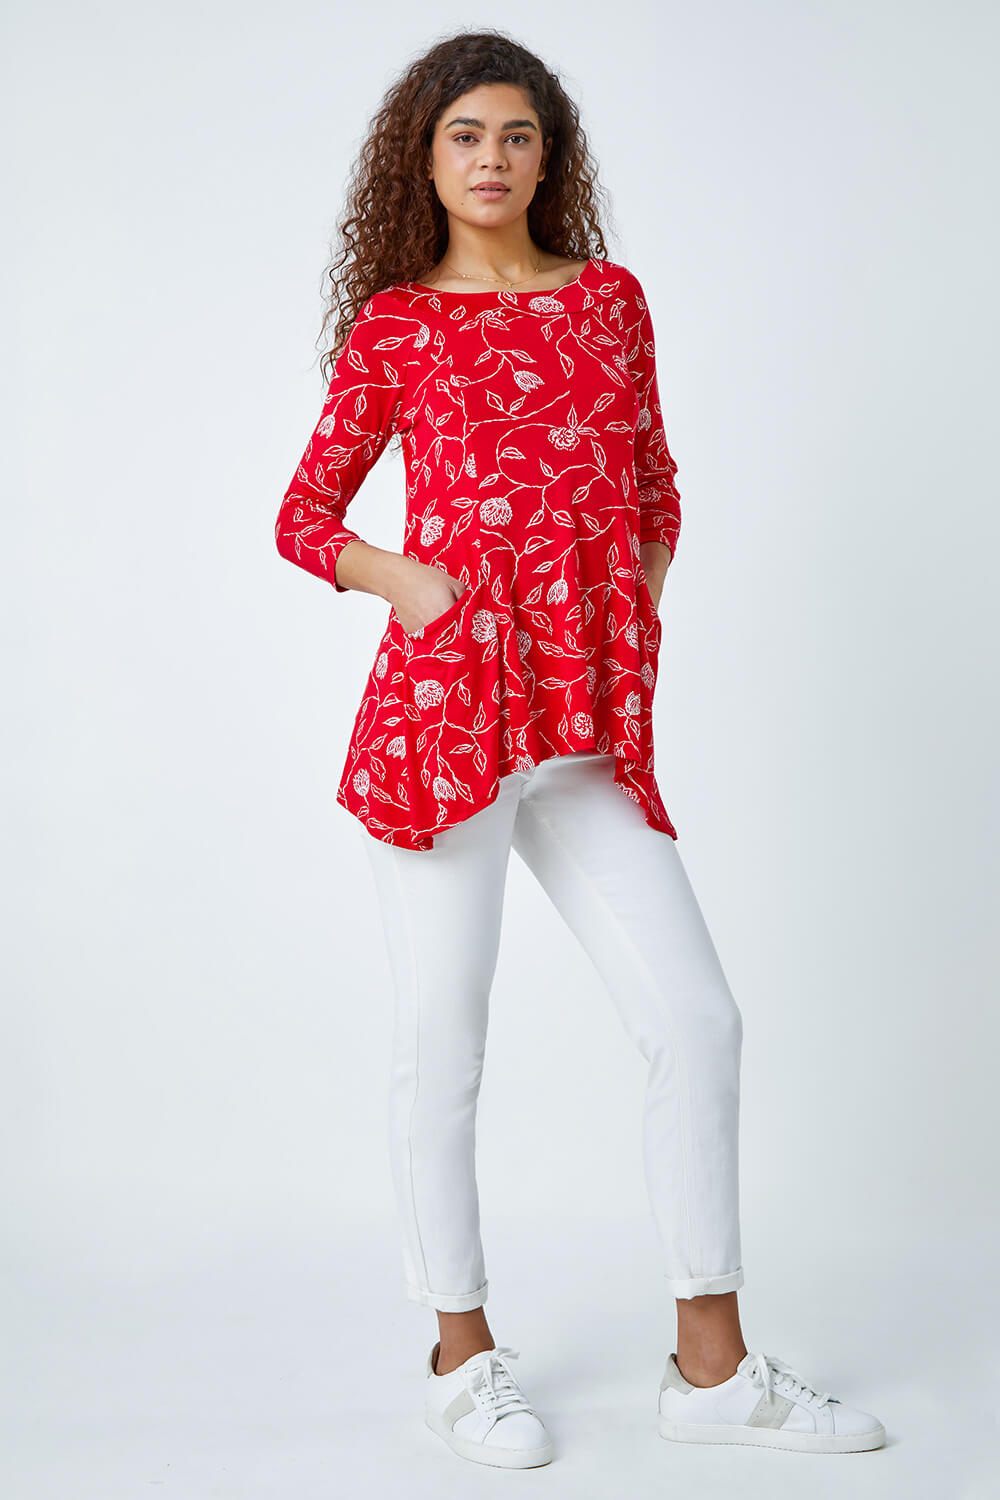 Red Floral Print Swing Stretch Top, Image 2 of 5